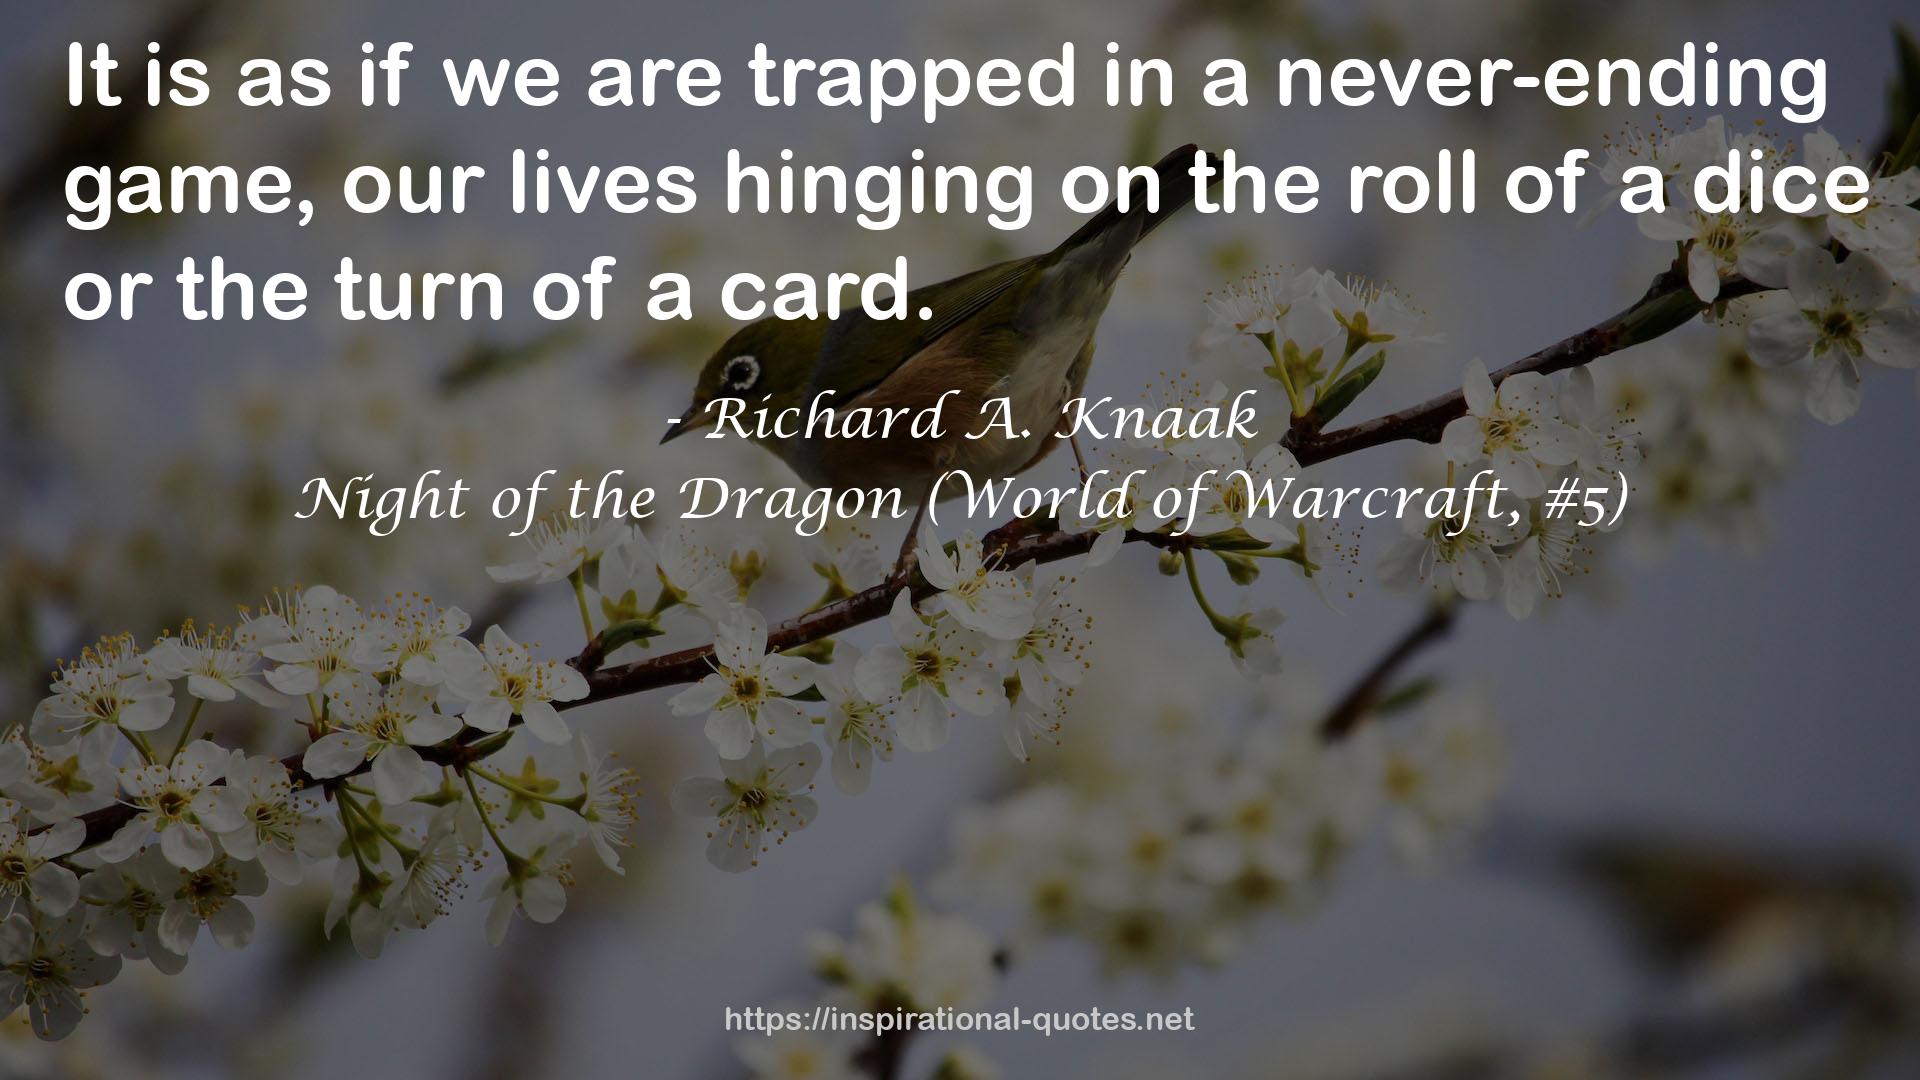 Night of the Dragon (World of Warcraft, #5) QUOTES